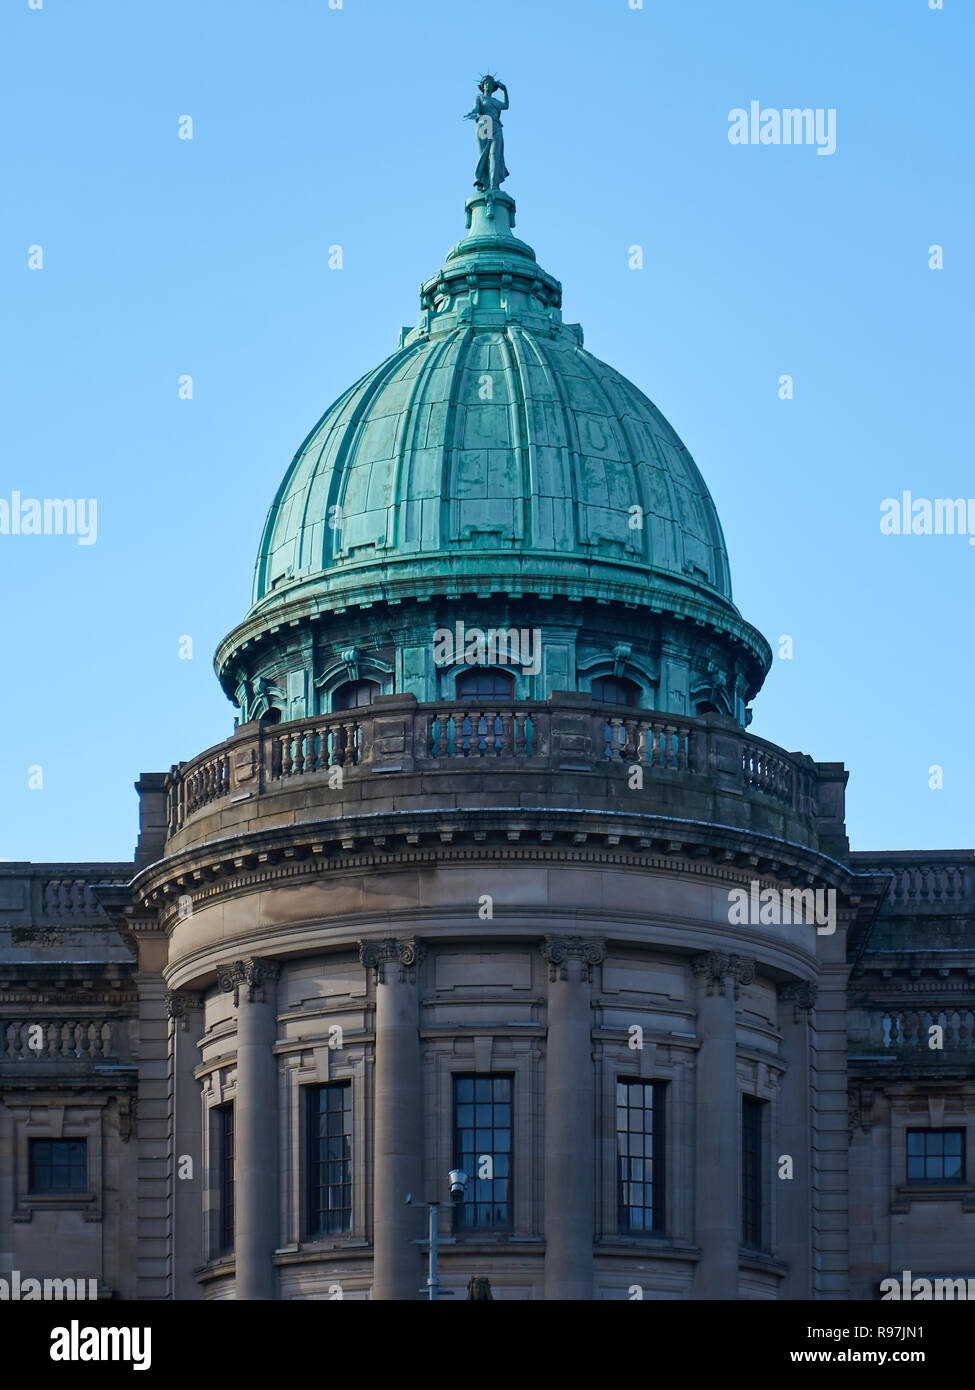 Domed green copper roof of a Mitchell Library building positioned next to an M8 motorway in Glasgow. Stock Photo